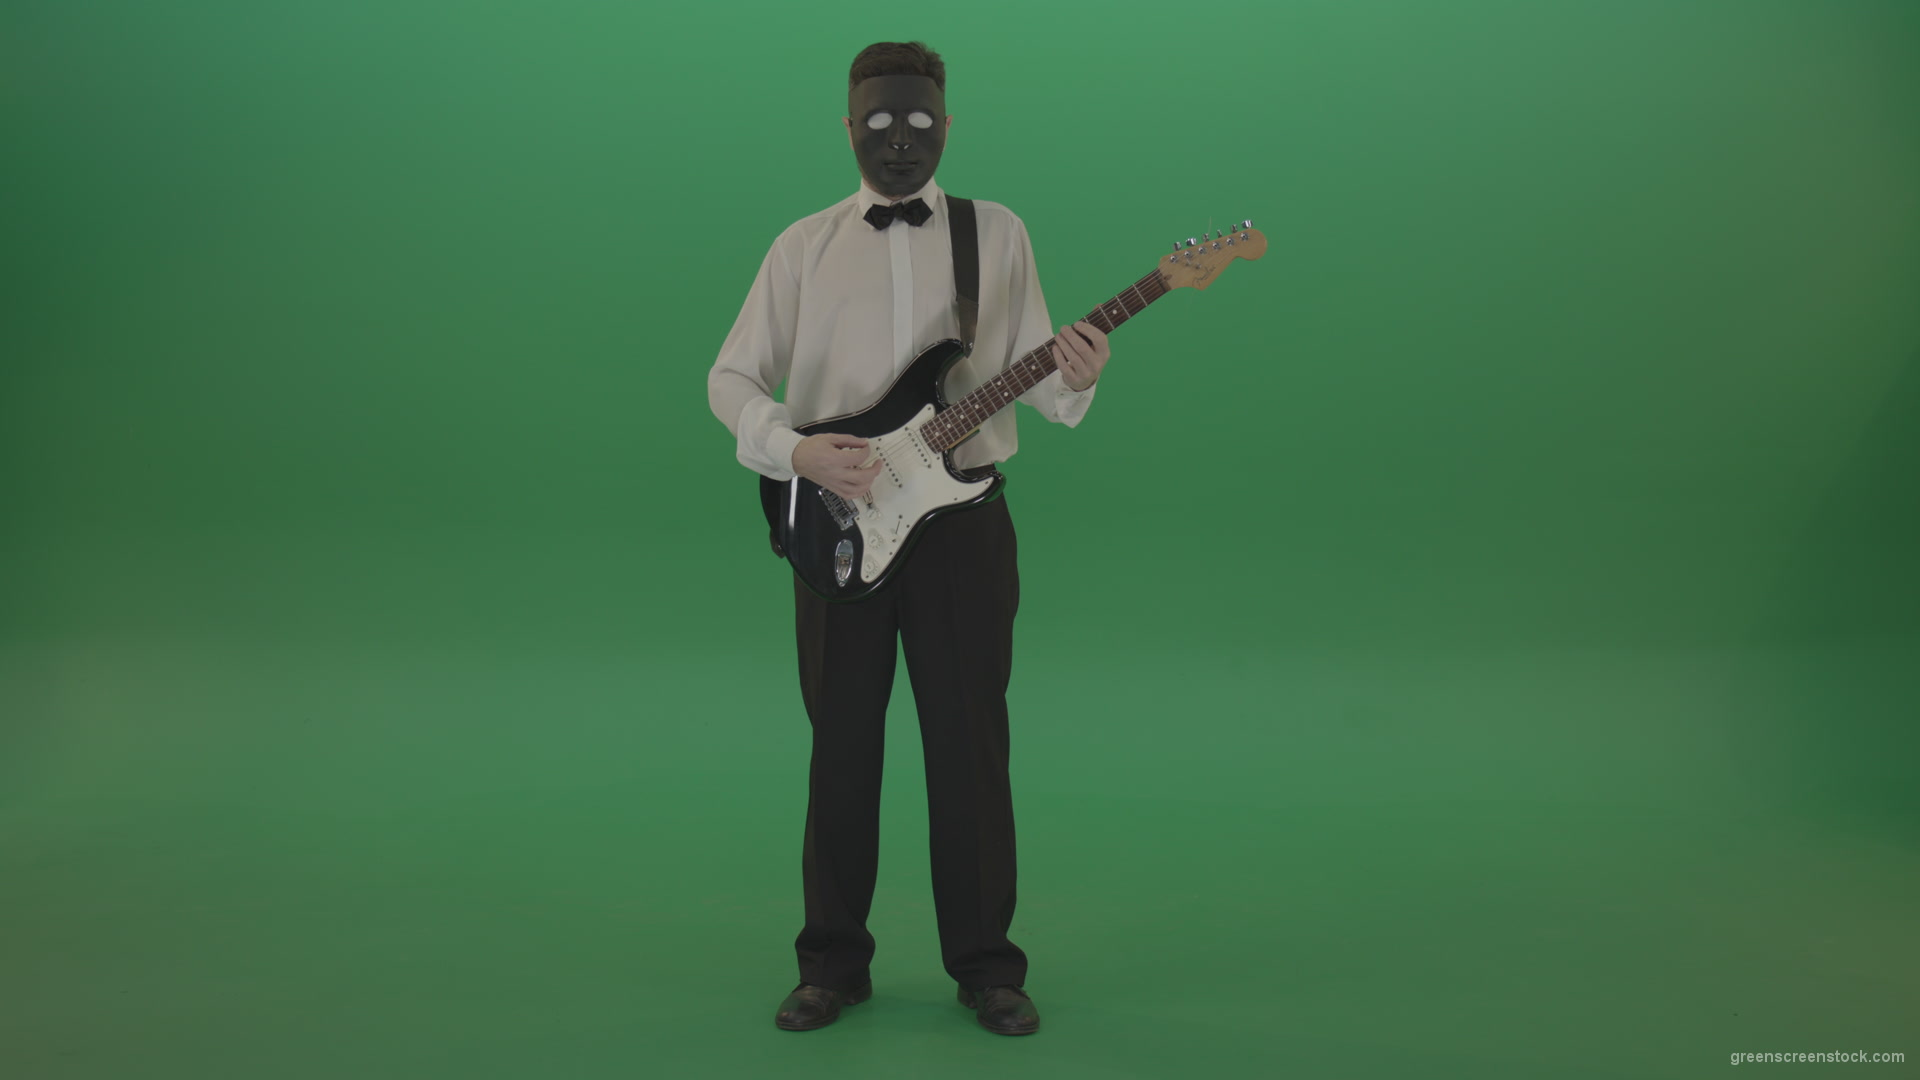 Classic-guitarist-in-white-shirt-play-guitar-in-mask-isolated-on-green-screen_005 Green Screen Stock